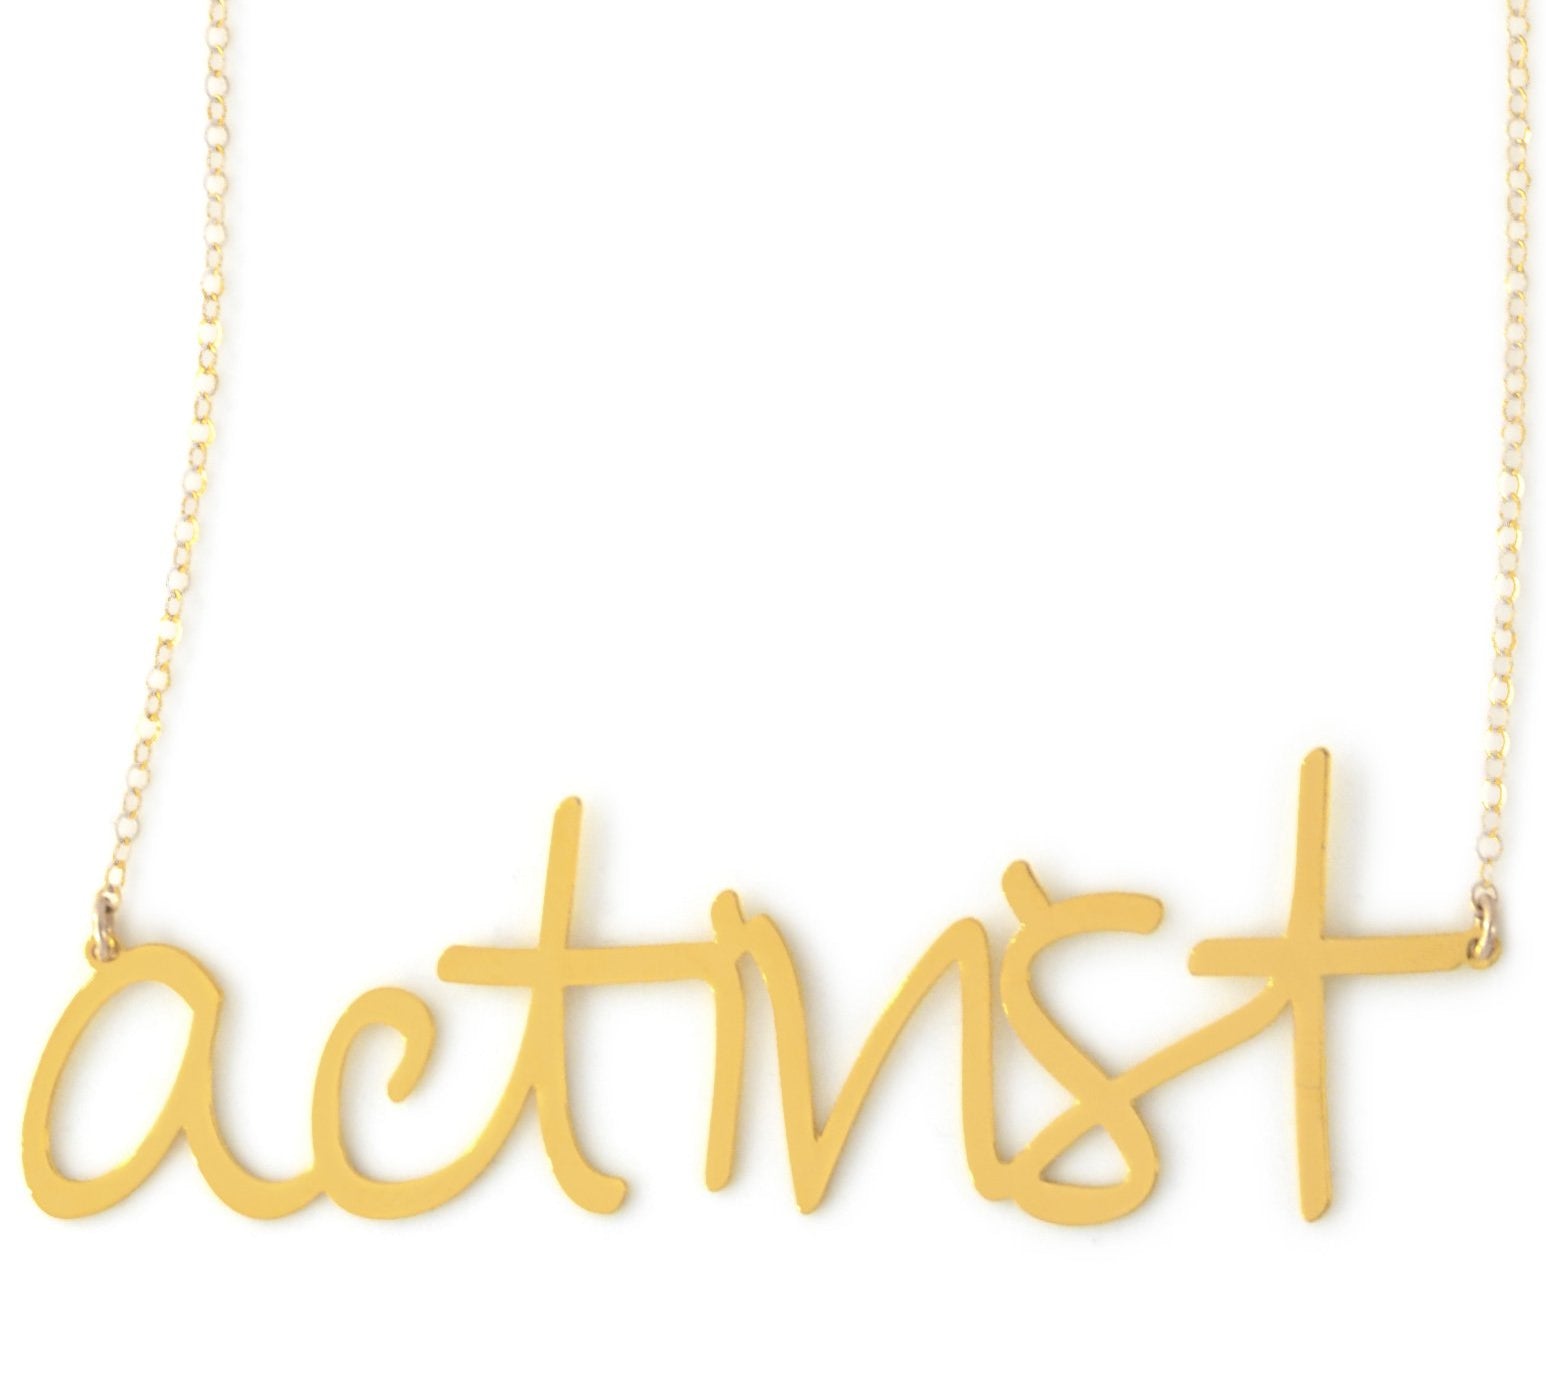 Activist Necklace - High Quality, Affordable, Hand Written, Empowering, Self Love, Mantra Word Necklace - Available in Gold and Silver - Small and Large Sizes - Made in USA - Brevity Jewelry